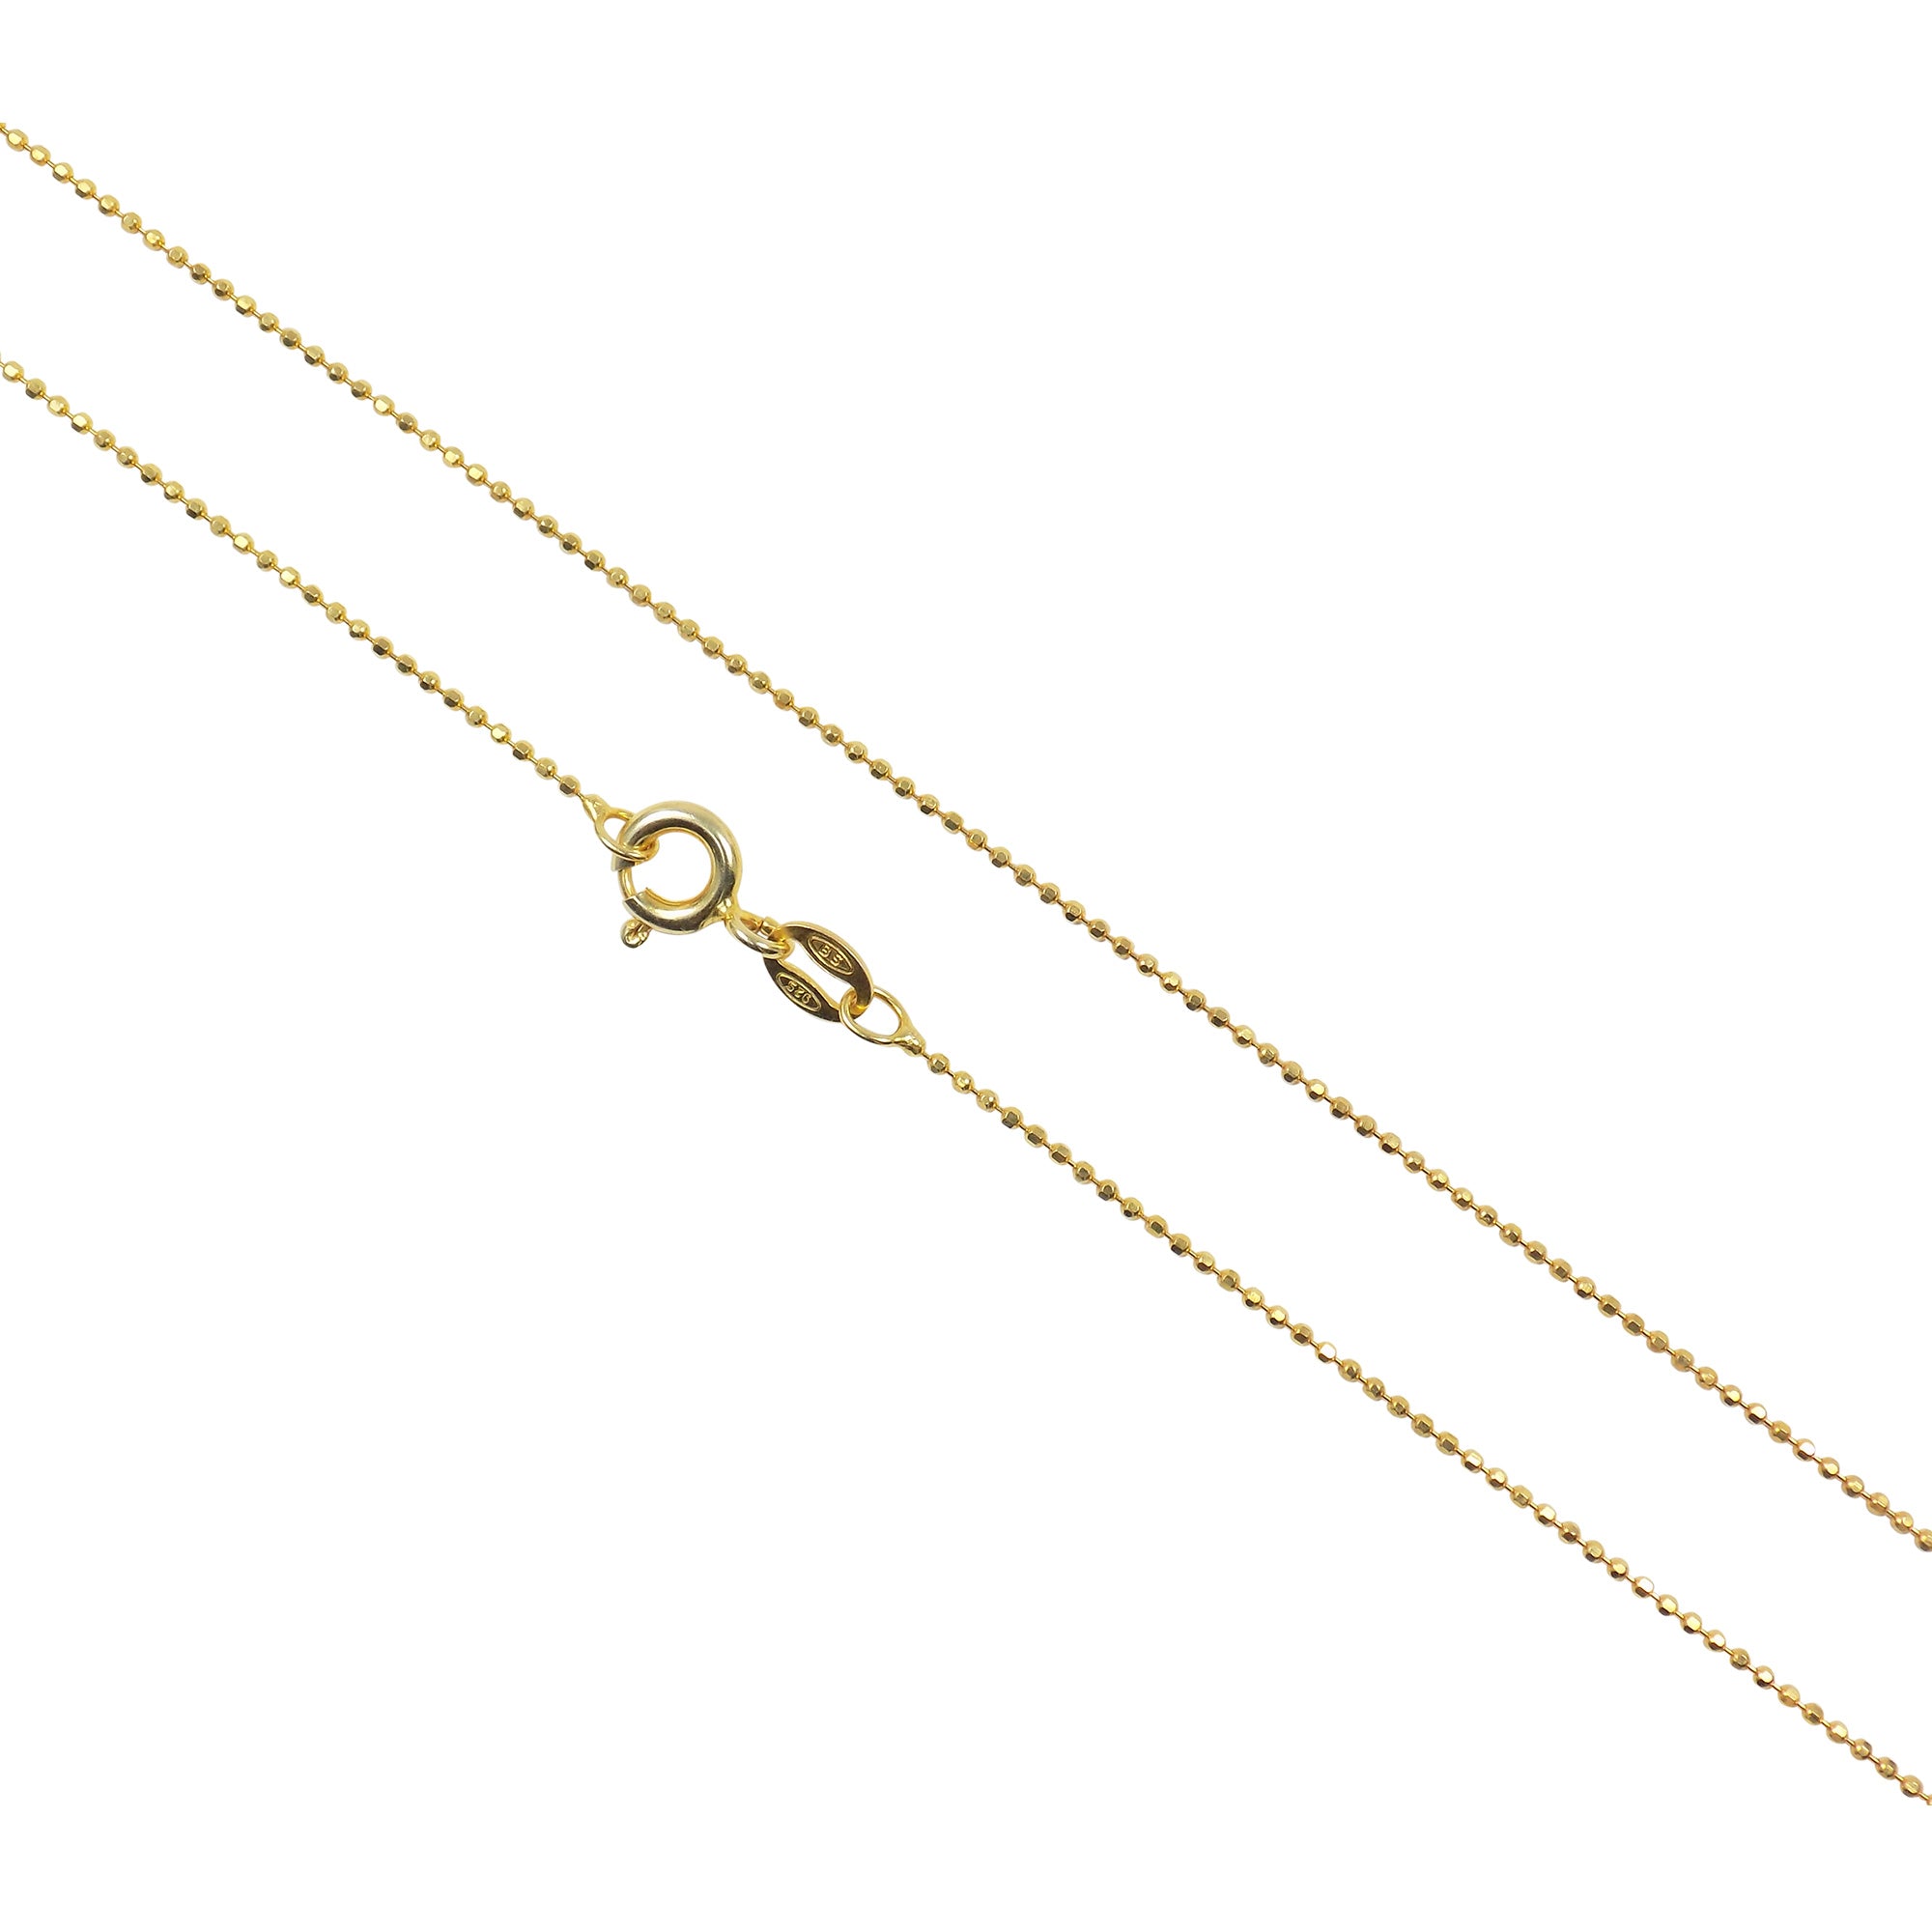 Gold Plated Chain 1.0 mm, Italian 925 Sterling Silver